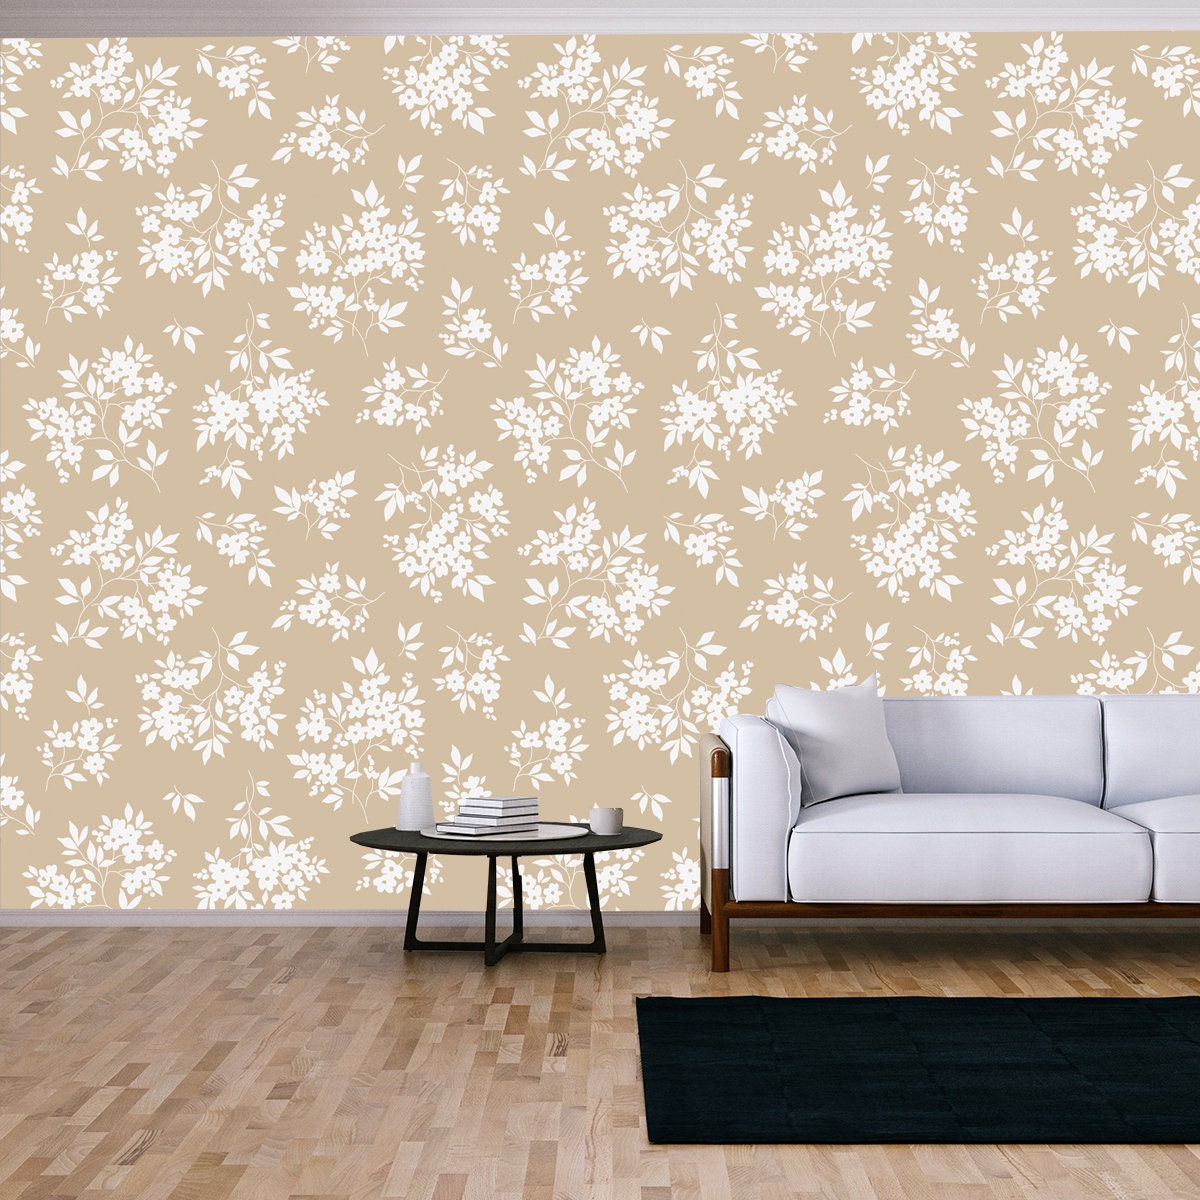 Vintage Seamless Floral Pattern. Liberty Style Background of Small White Flowers Wallpaper Living Room Mural